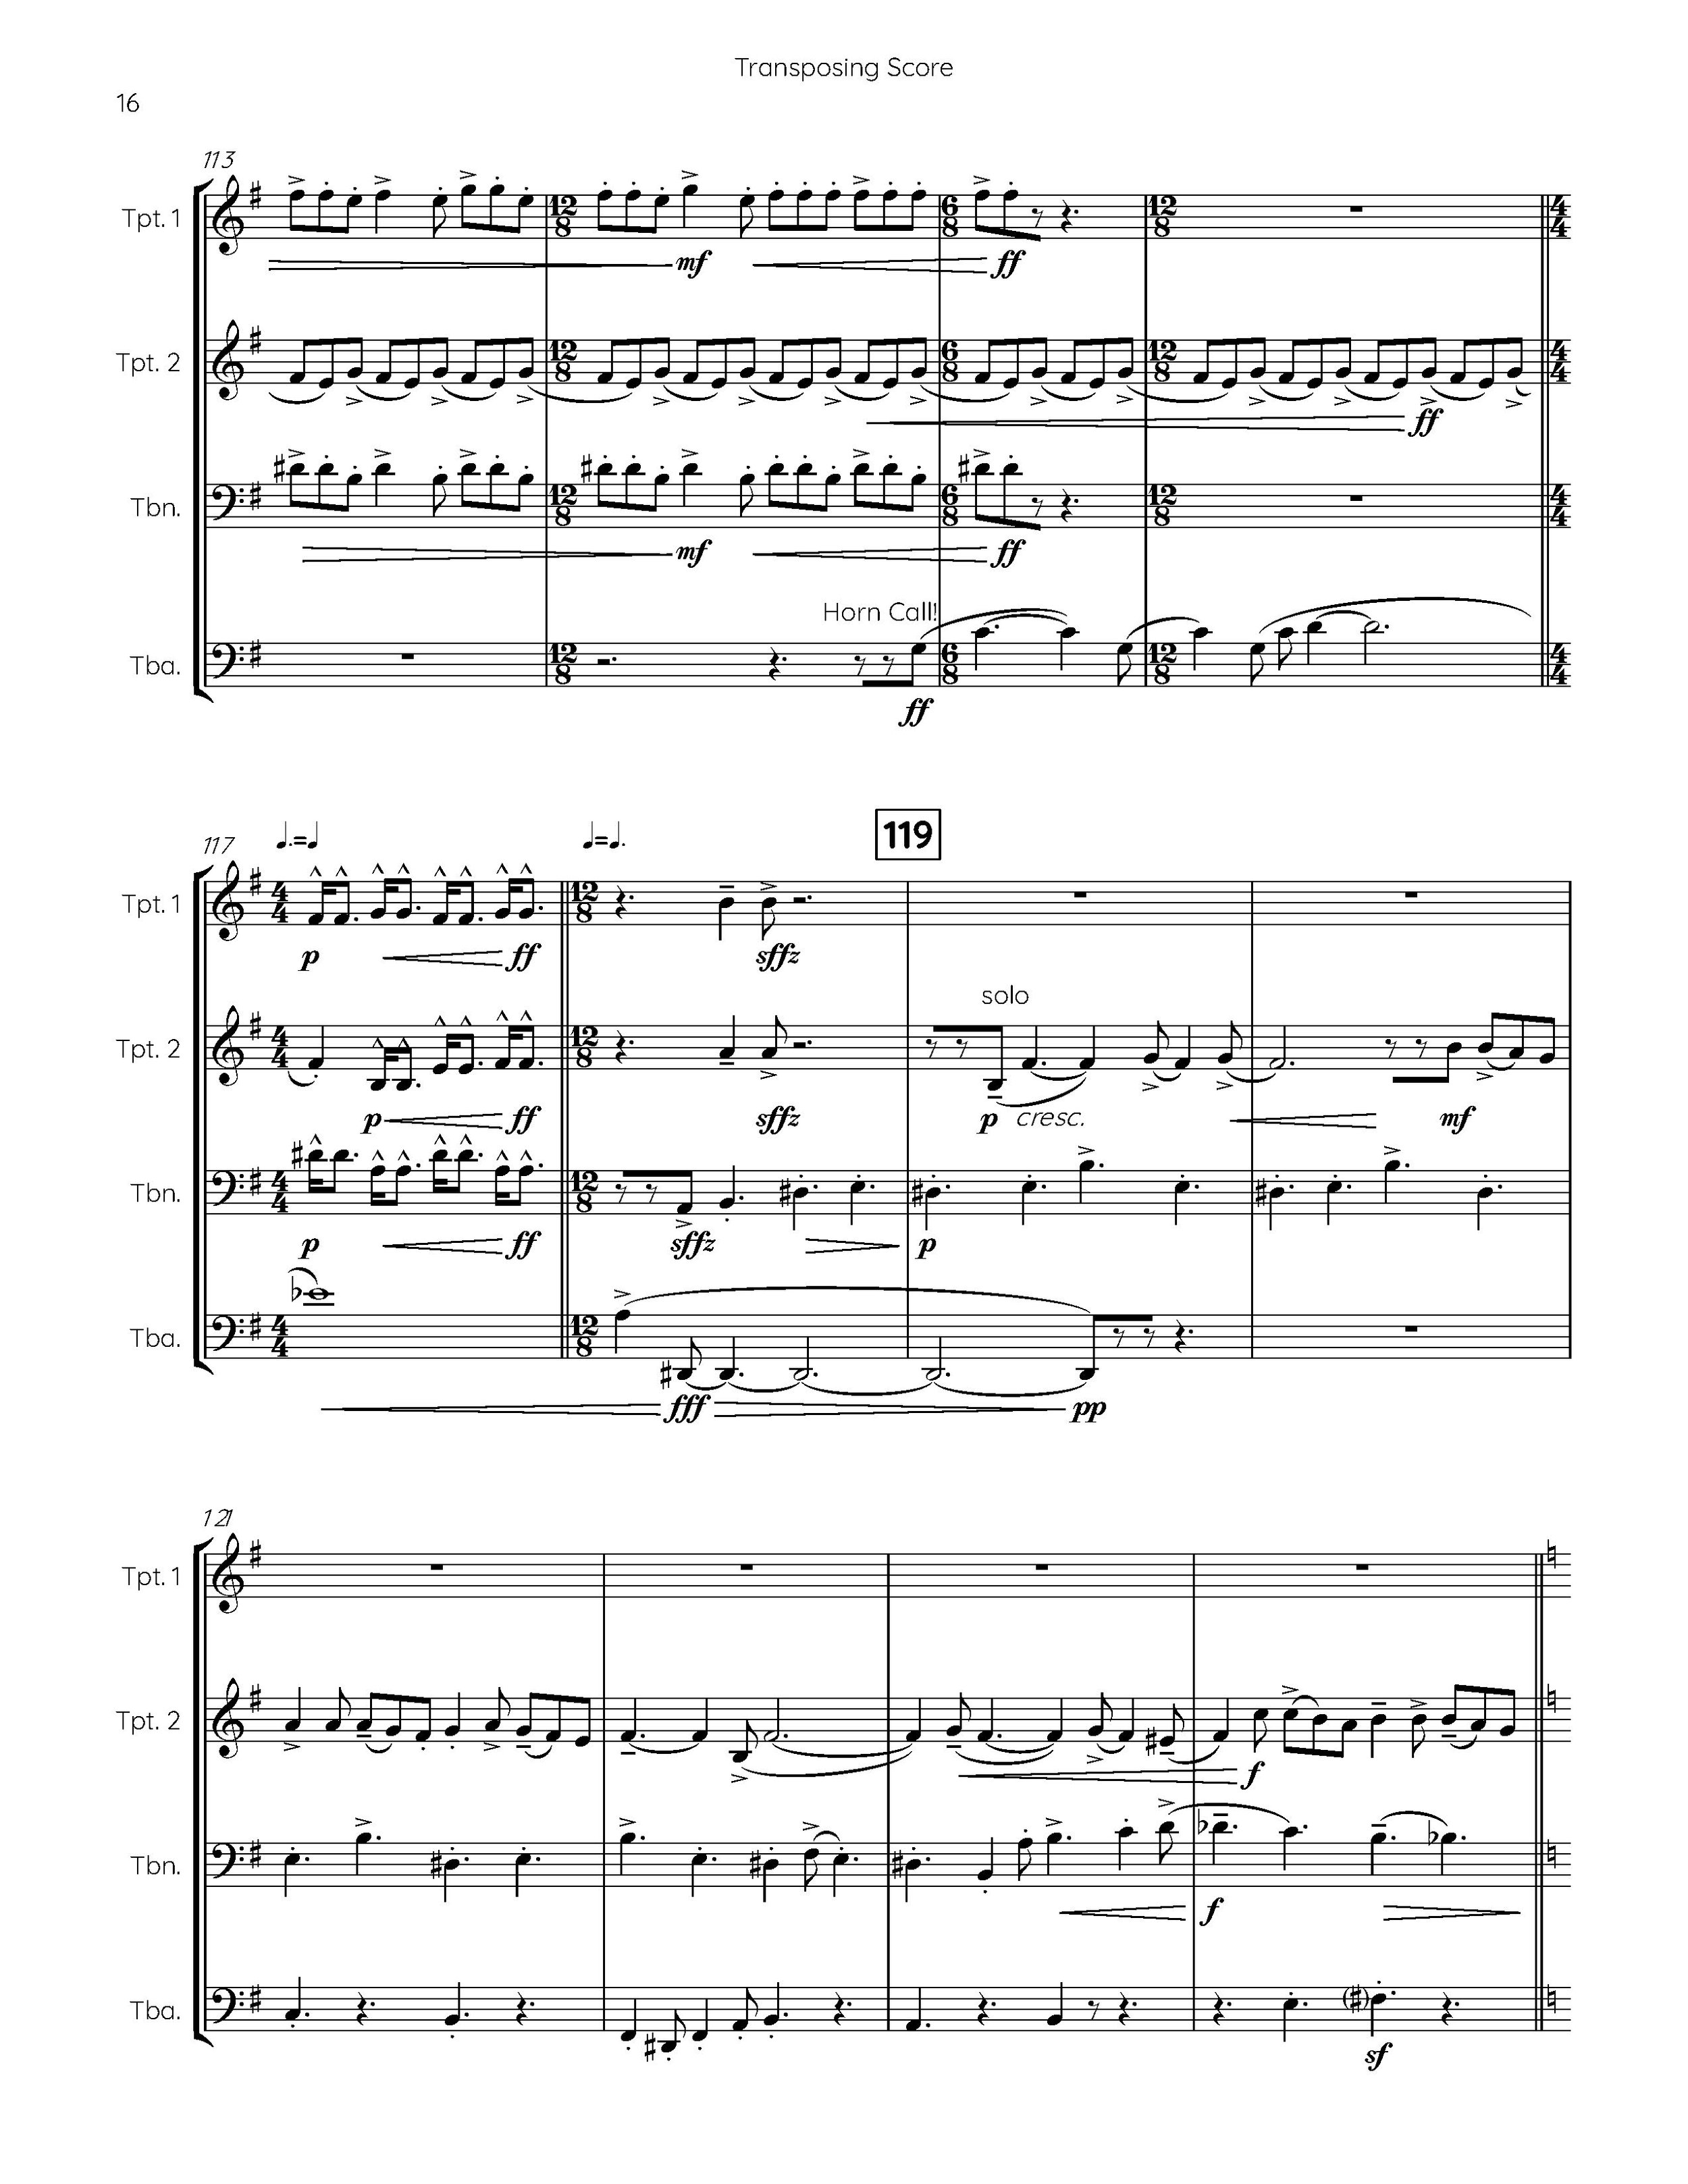 v1.2 Journey to the Ends of the World I. Horn Call - Transposing Score_Page_16.jpg